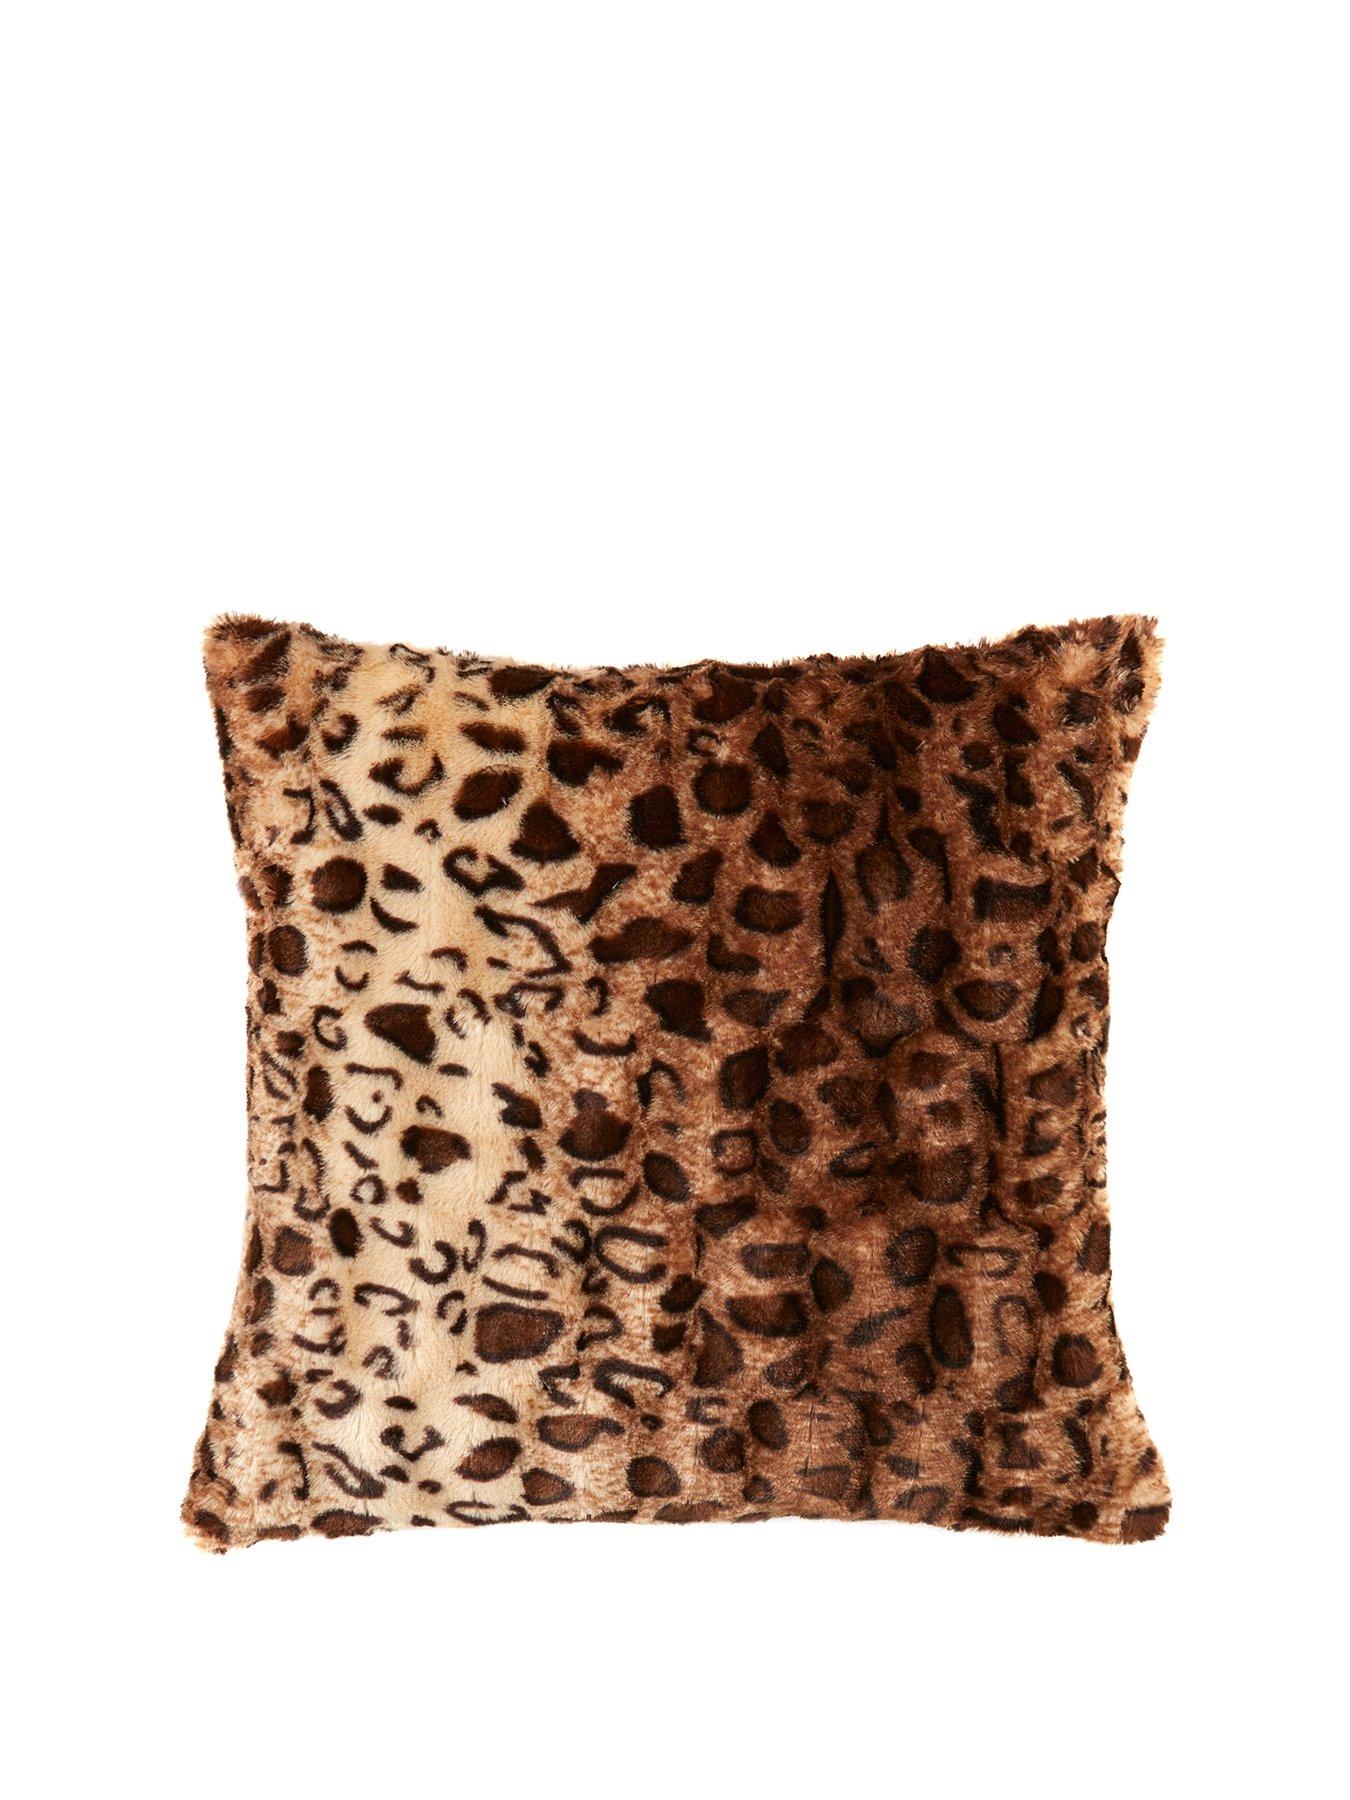 Natural Cream Hedgehog Design Cotton Cushion Cover INSERT NOT INCLUDED 